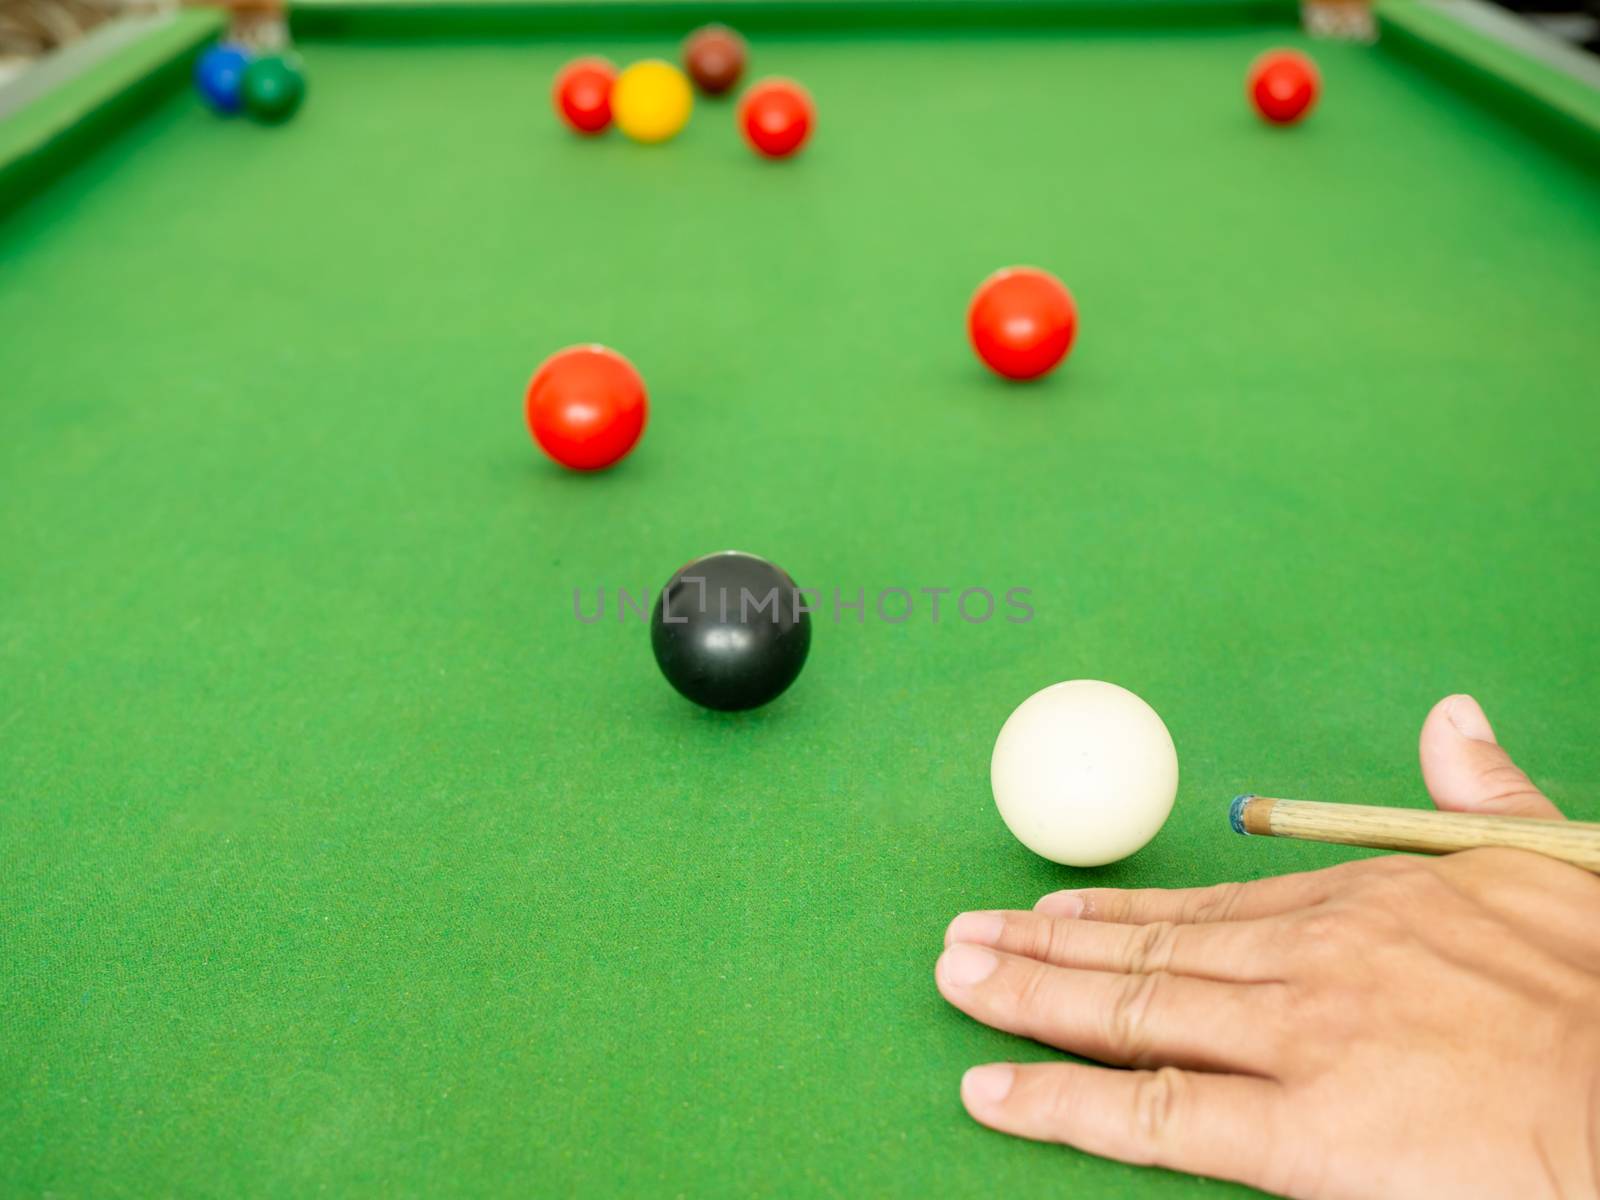 Hand people playing snooker by Unimages2527